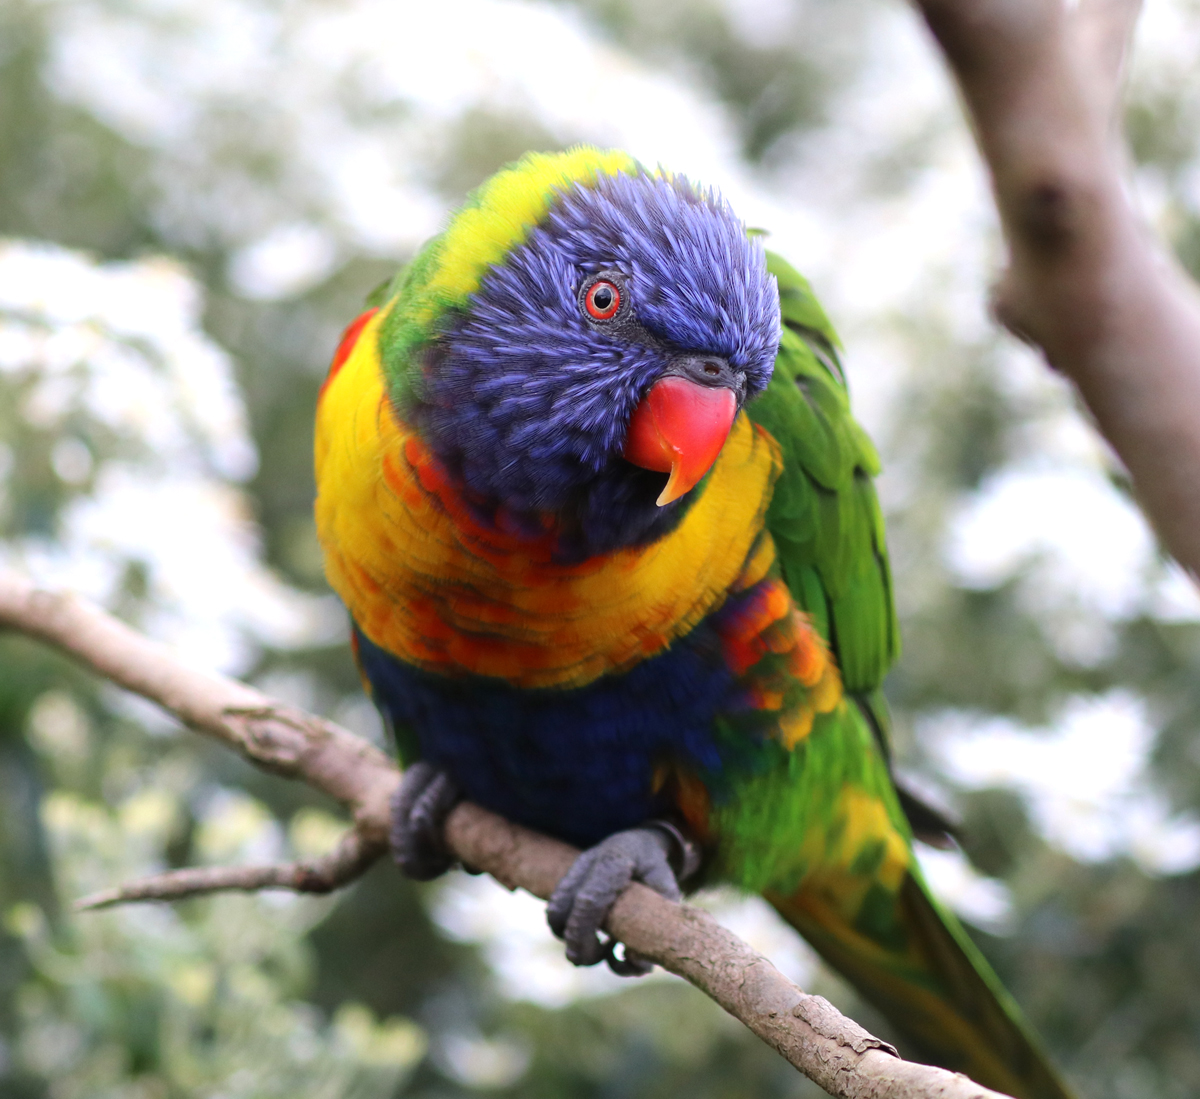 At 2pm you can experience the 'Flight of the Rainbows' with option to buy some nectar to feed the Lorikeets that come swooping out from their enclosure down onto the awaiting crowd. Daily events paradisepark.org.uk/events.../dail… Photograph by Director Alison